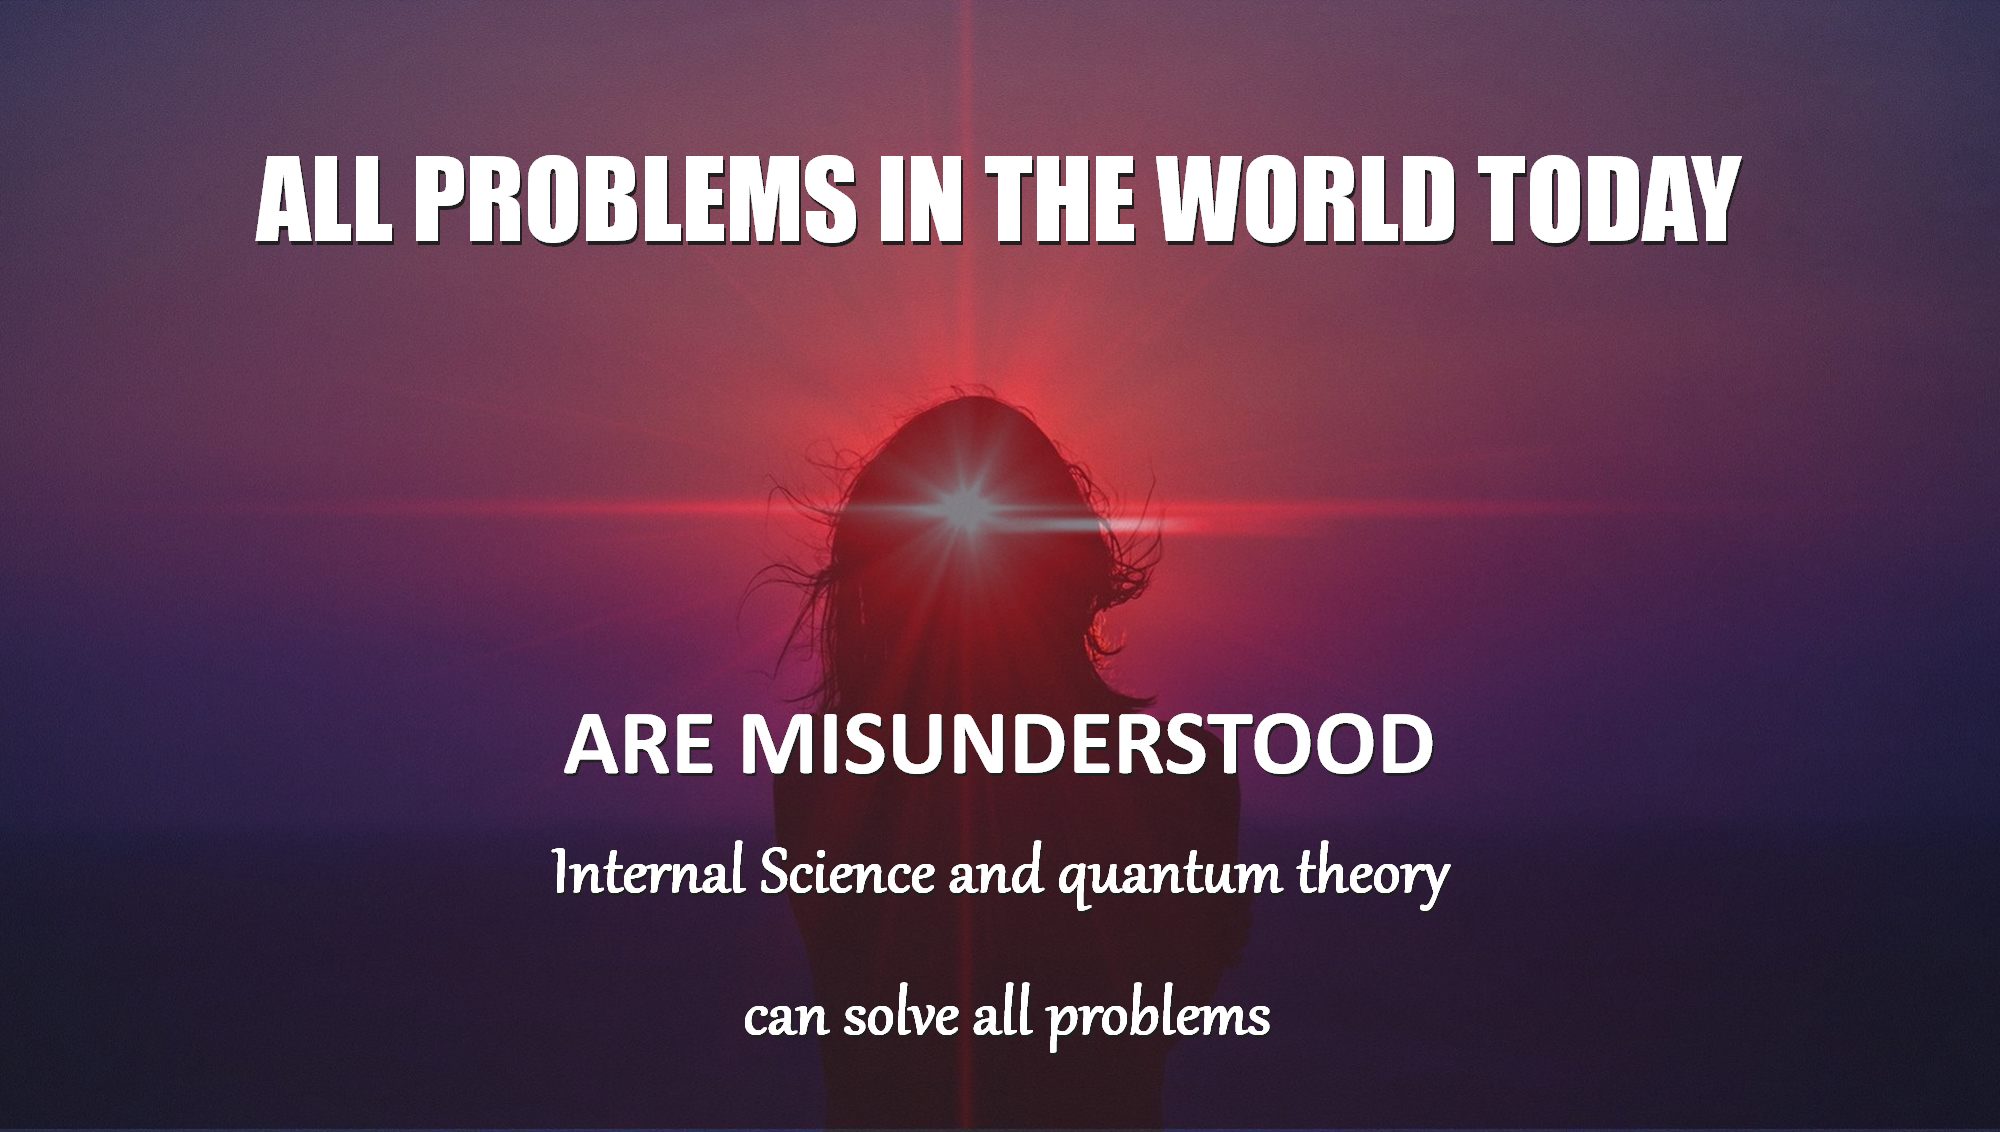 All problems in world today can easily be solved with new Internal science quantum theory international philosophy